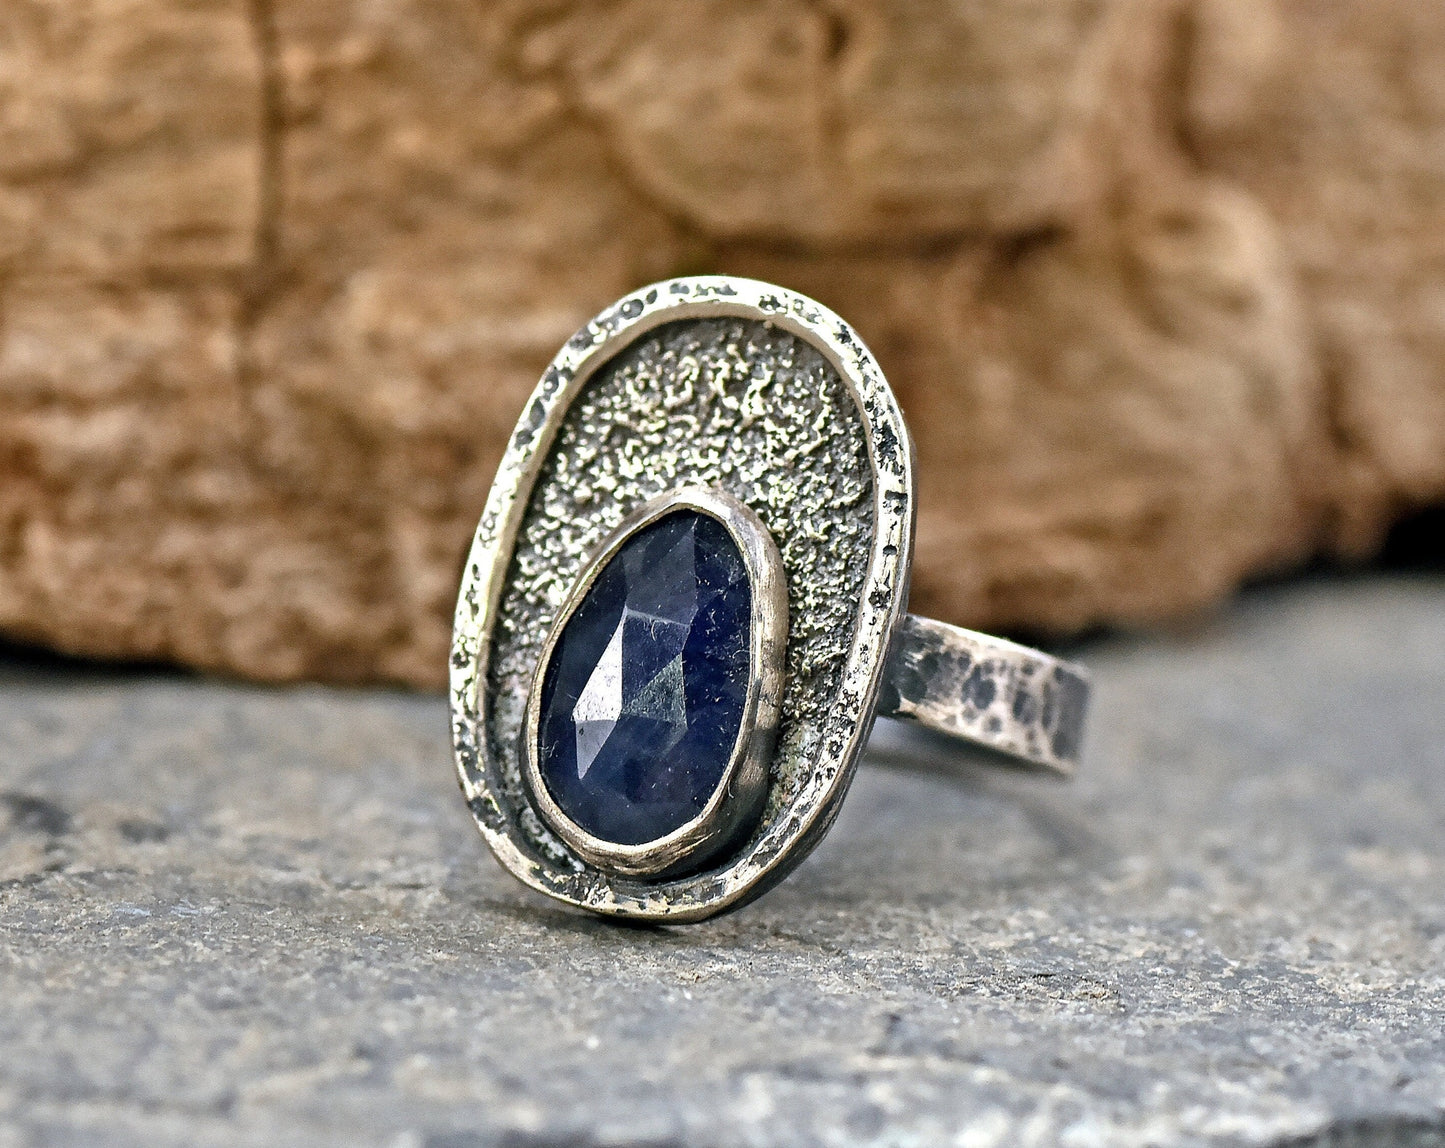 Dark Blue Sapphire Ring Sterling Silver, Size 8, Rustic Silversmith Jewelry, Unique Teardrop Faceted Gemstone, Artisan Metalsmith